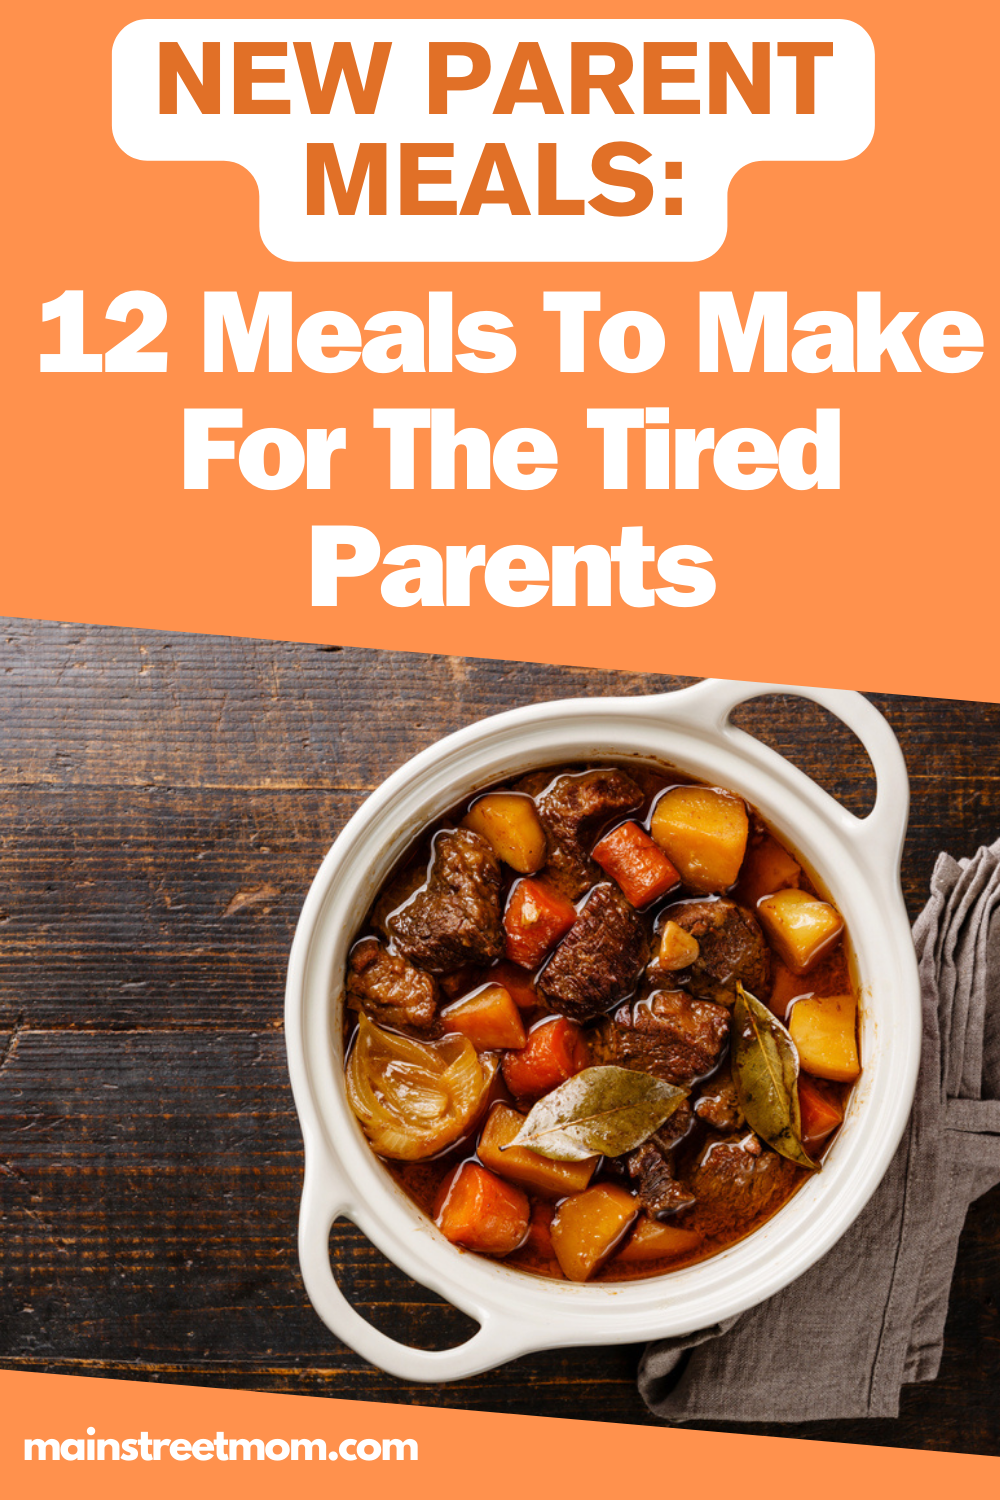 New Parent Meals: 12 Meals To Make For The Tired Parents